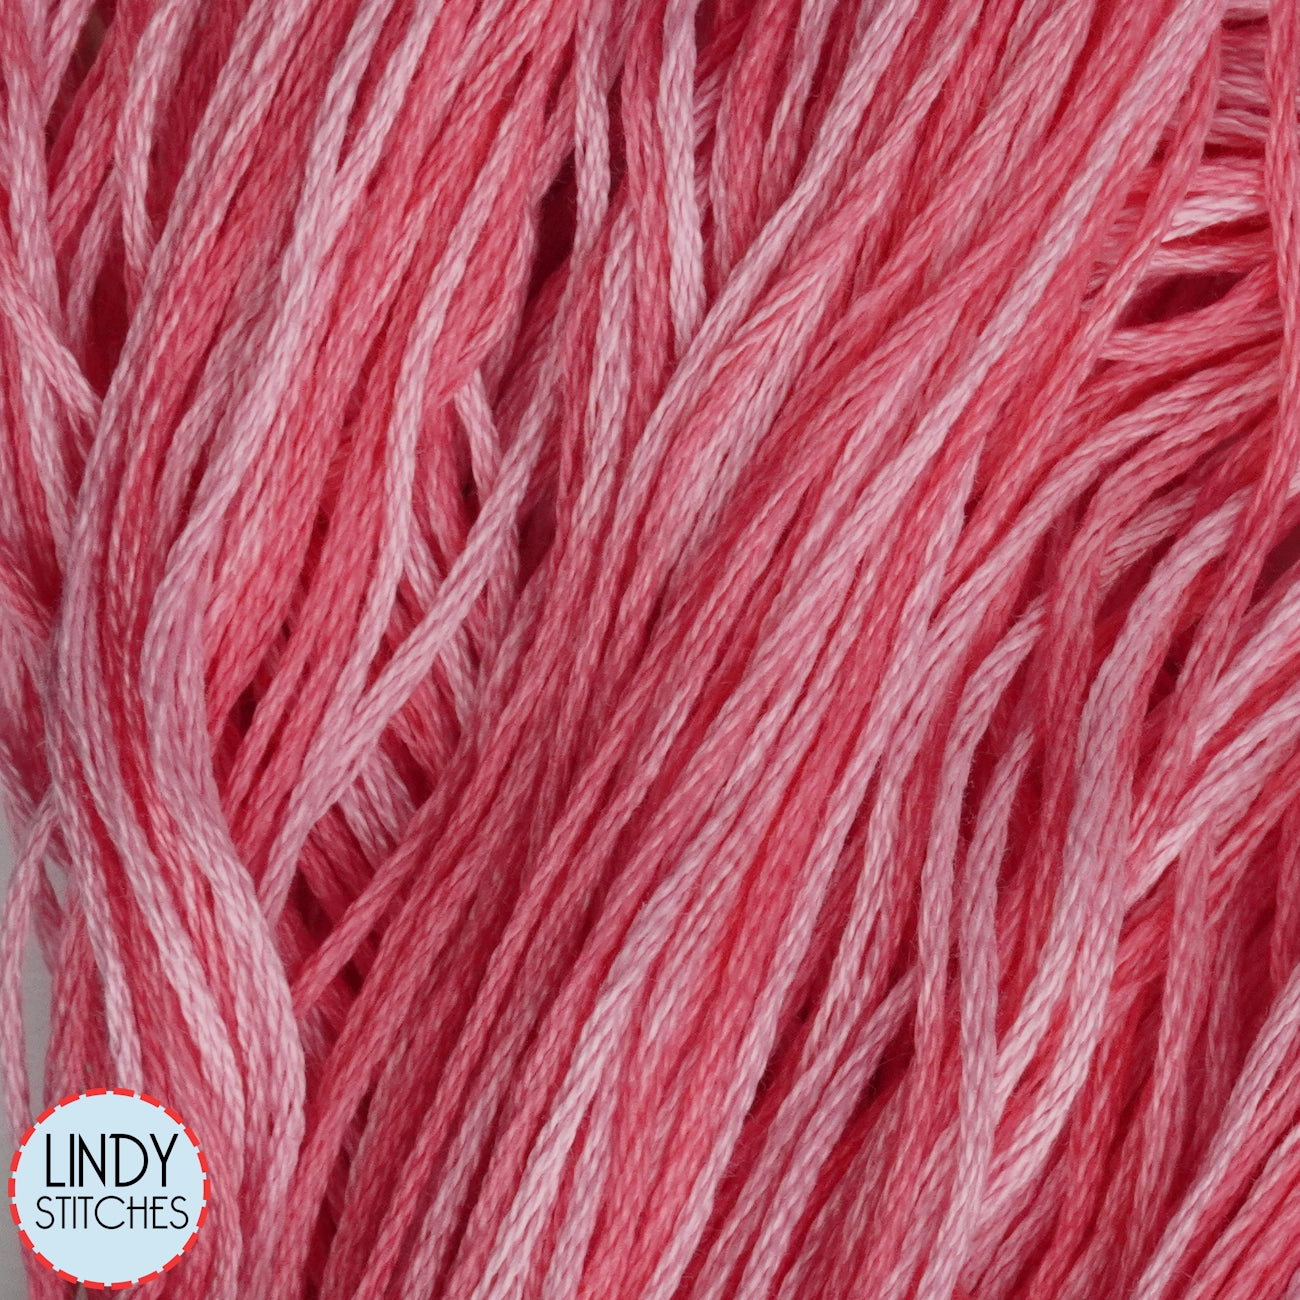 Crepe Myrtle Weeks Dye Works Floss Hand Dyed Cotton Skein 2275